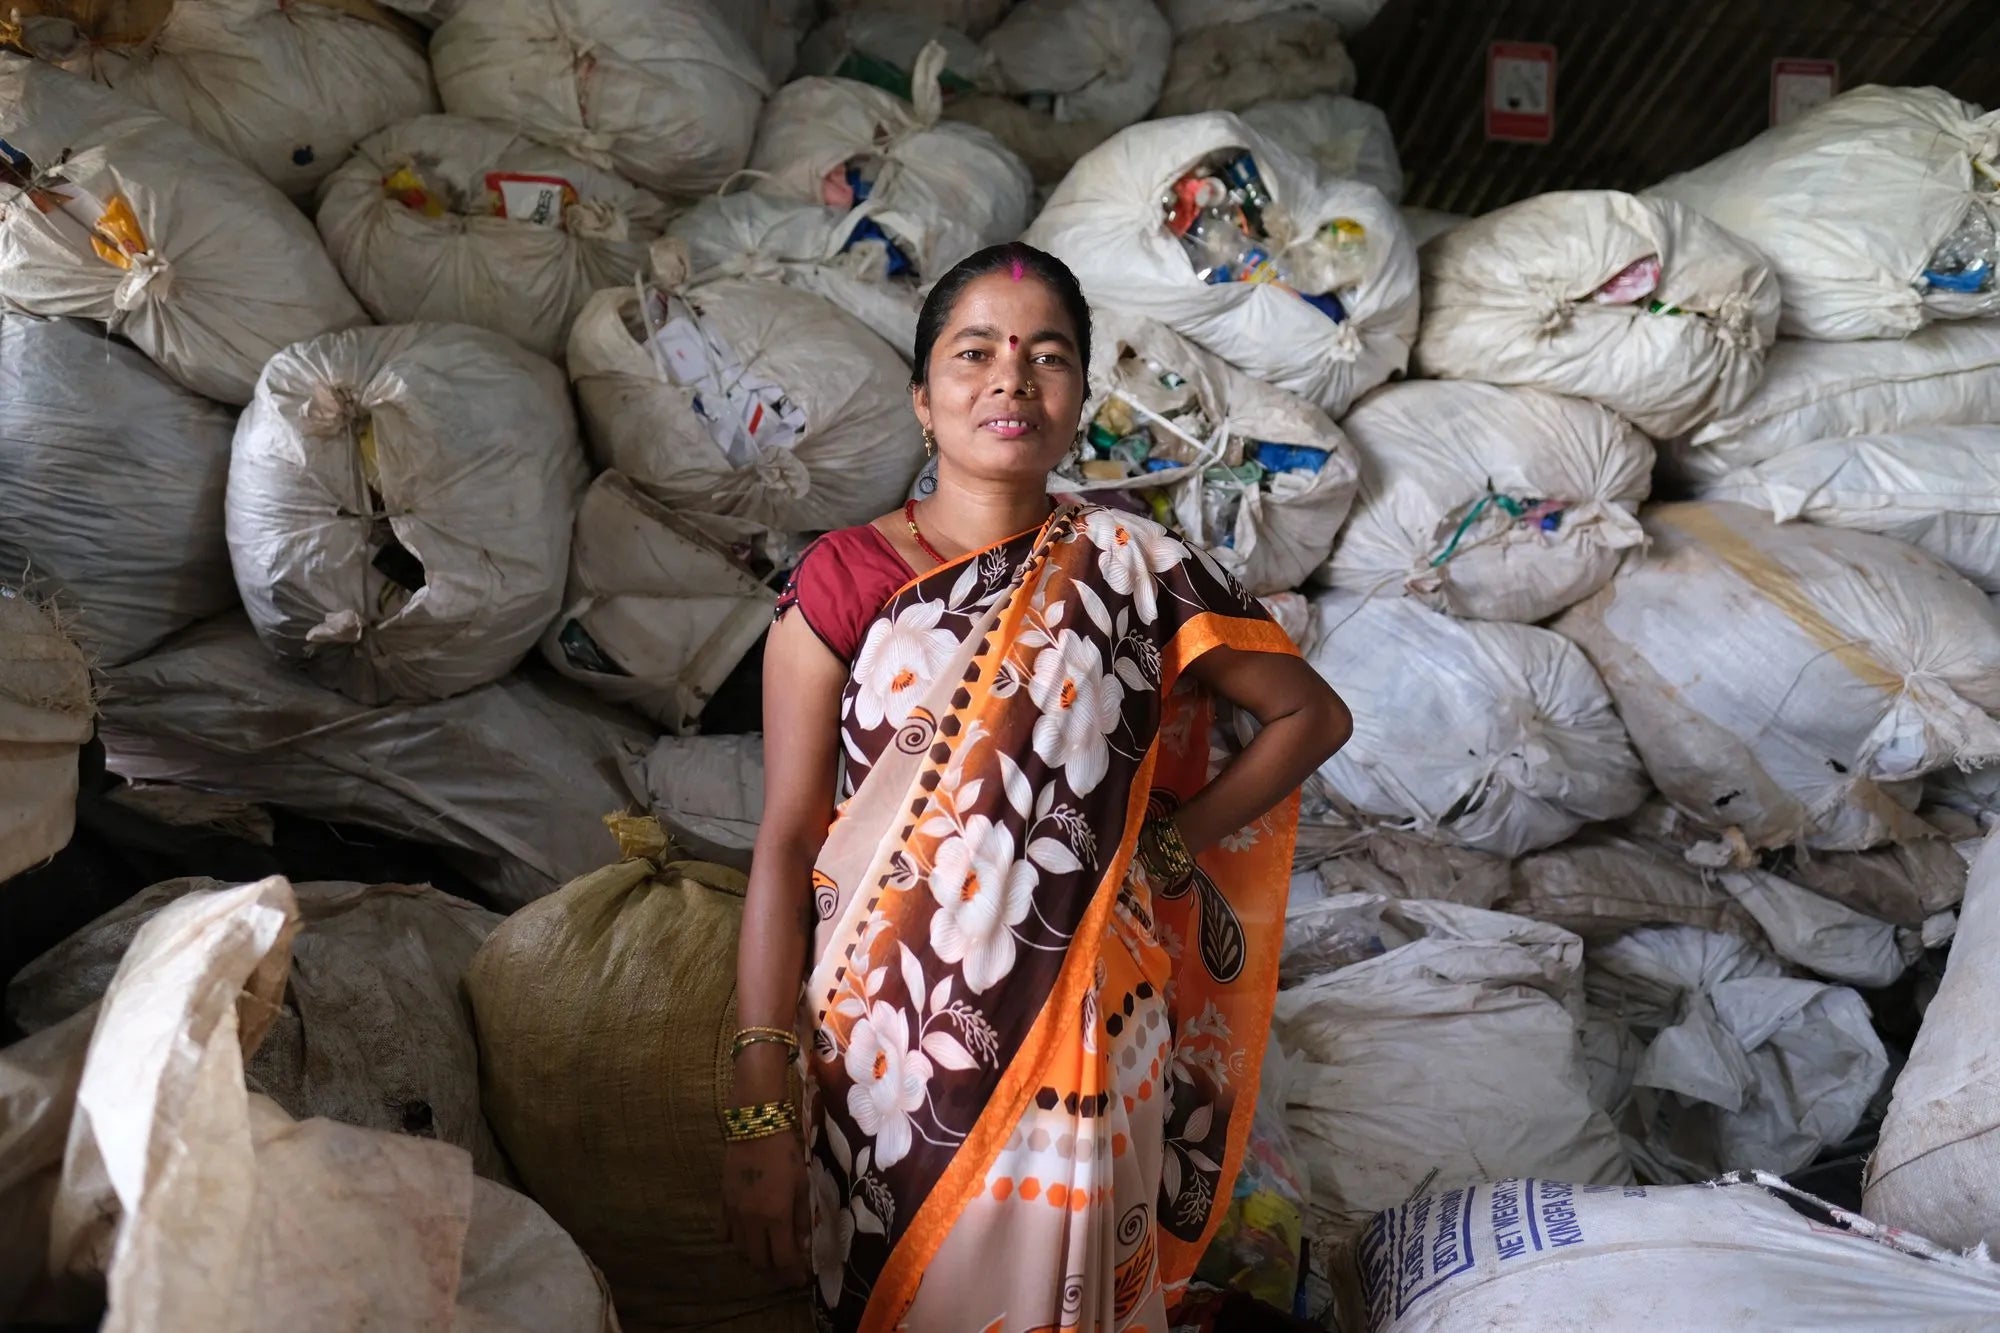 An image of a woman standing in front of bags of collected plastic